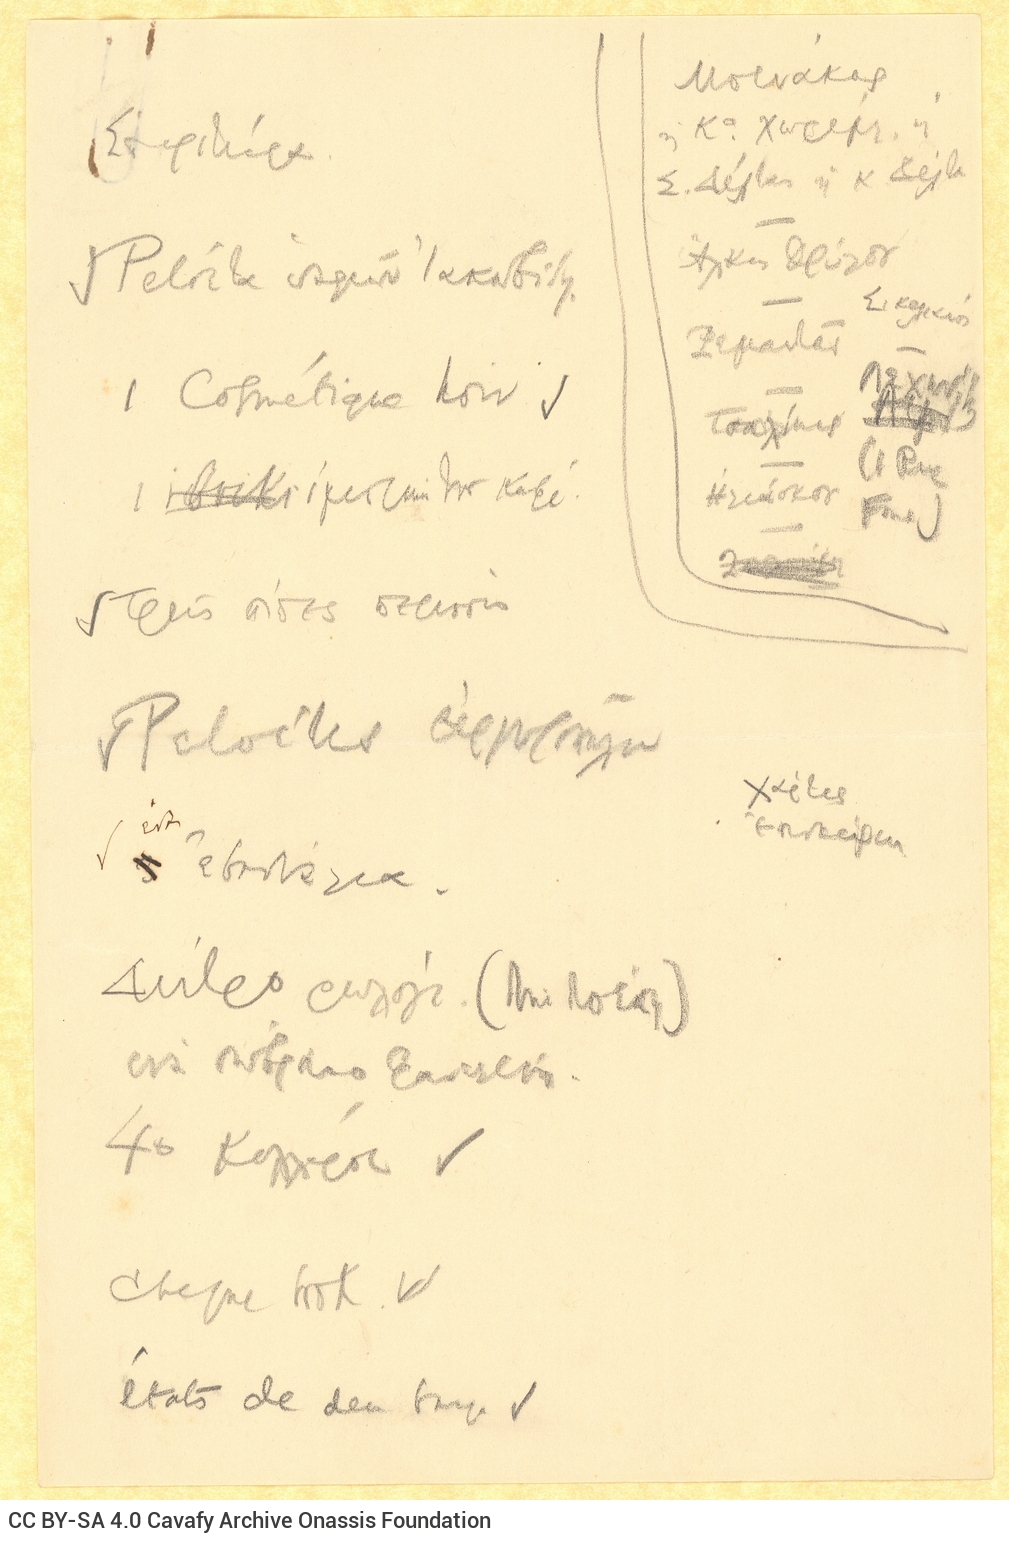 Handwritten list of garments and personal items, on both sides of a sheet and on the recto of a second sheet. Cancellation